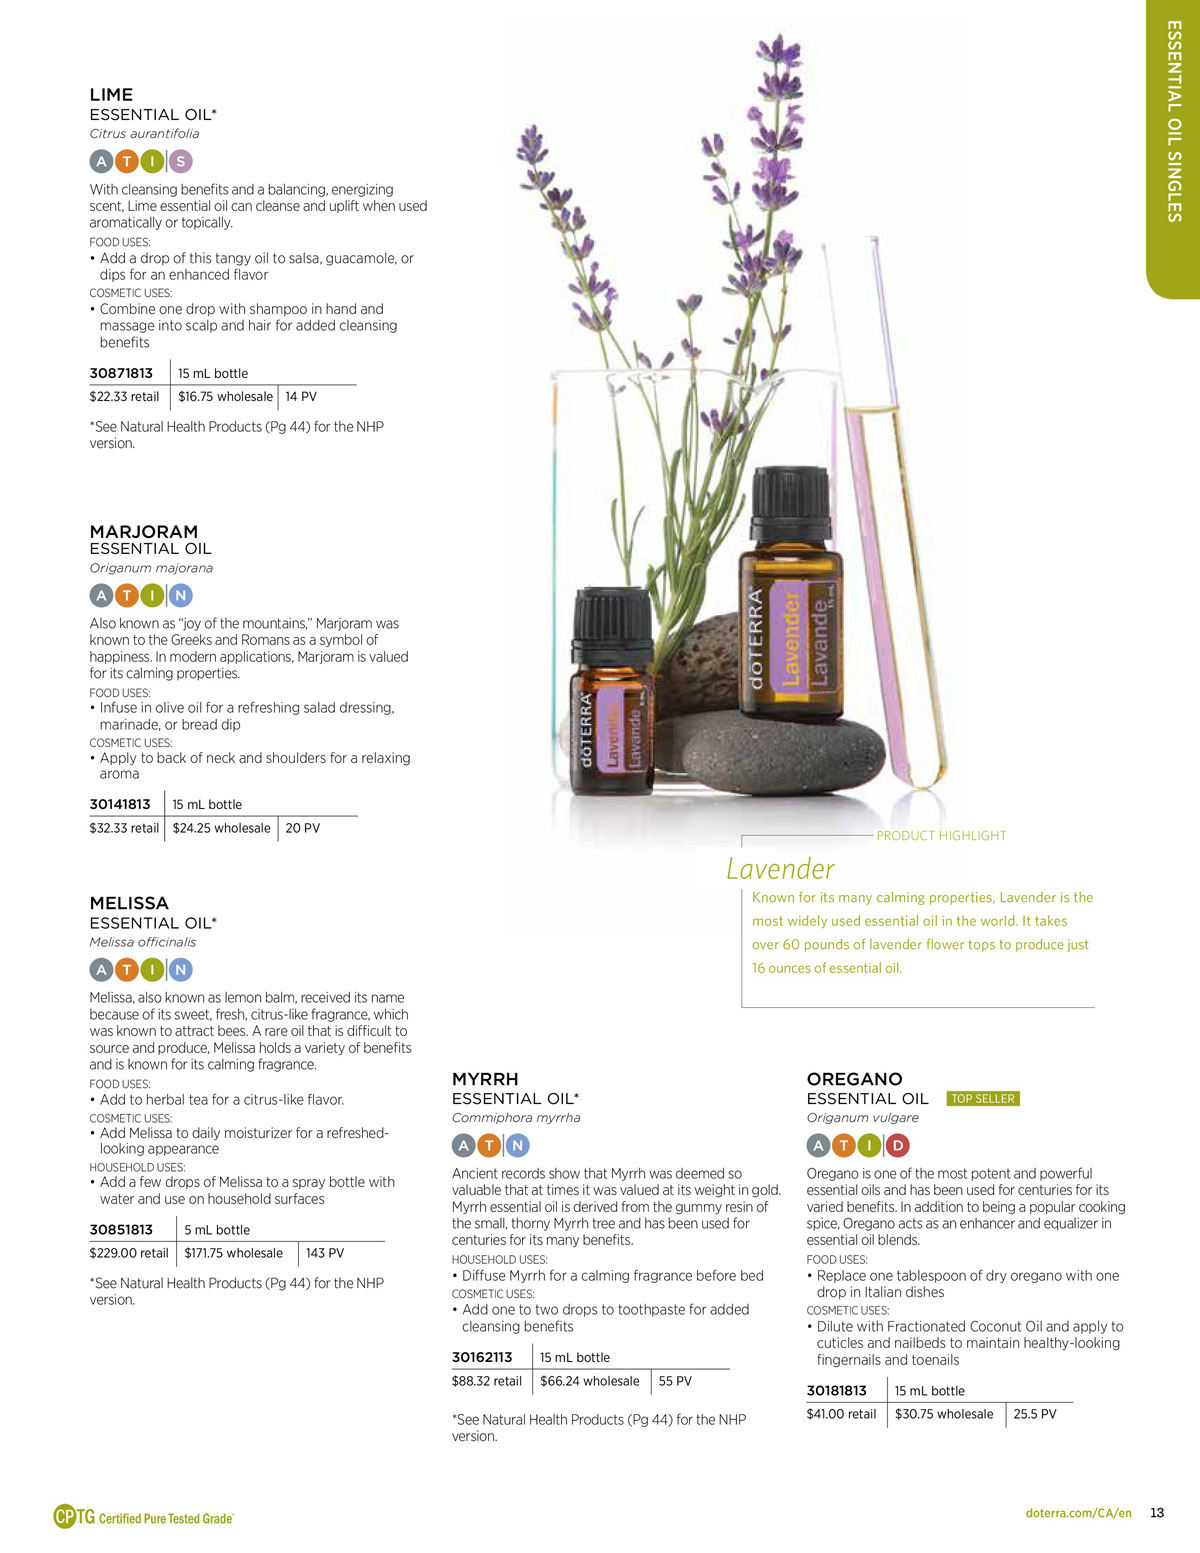 doterra product guide page 13